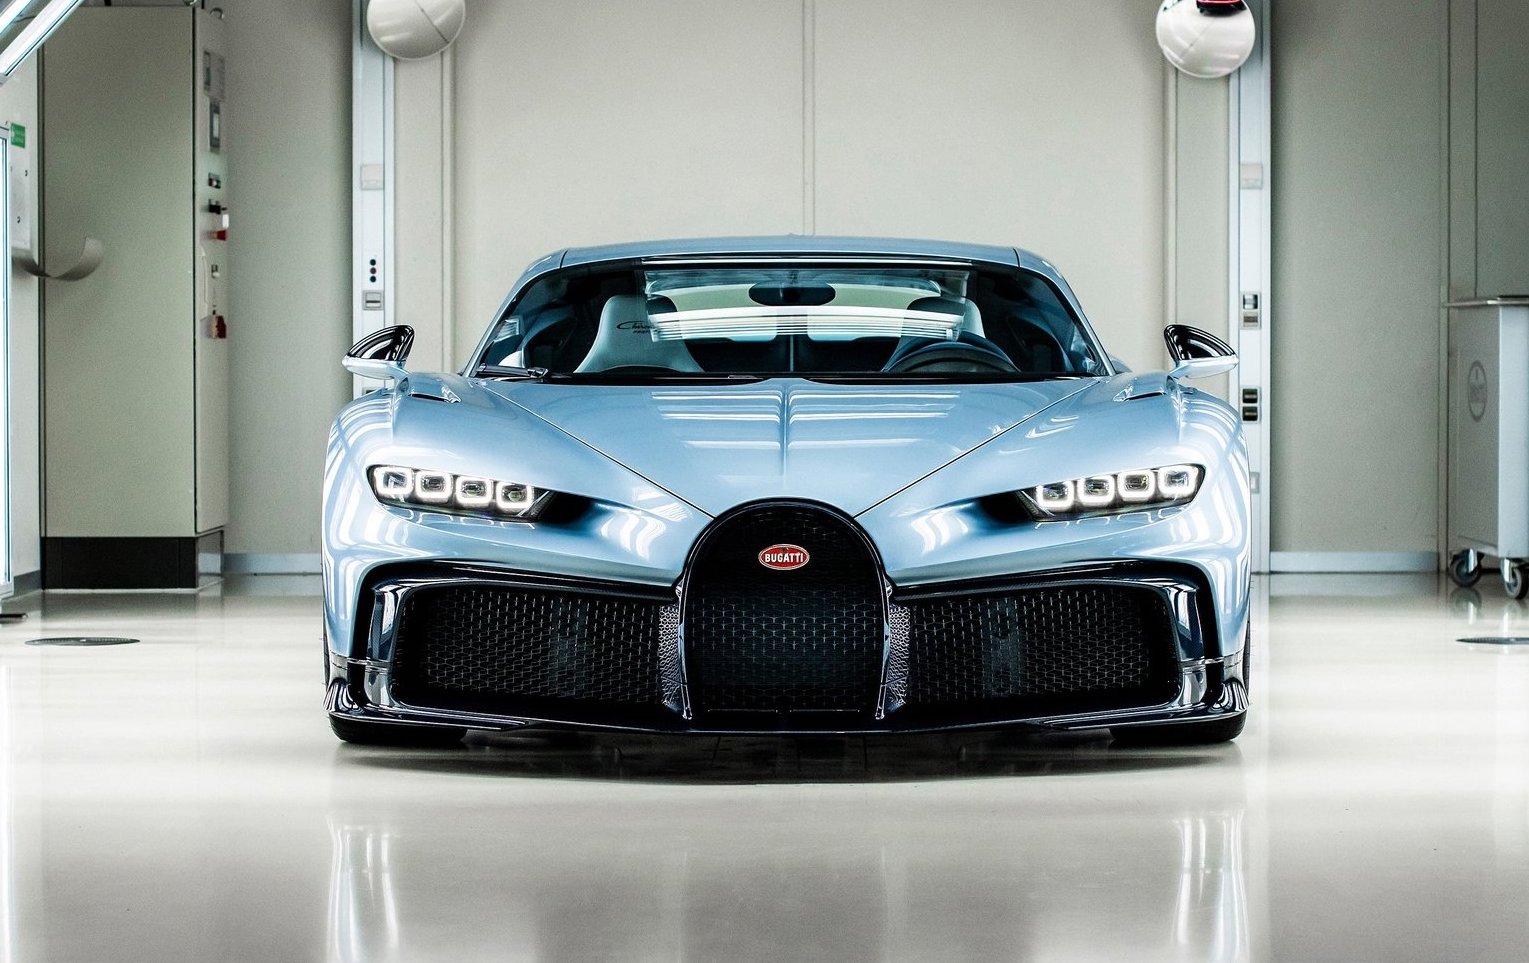 Bugatti Chiron Profilée one-off unveiled, to be auctioned off Feb 1